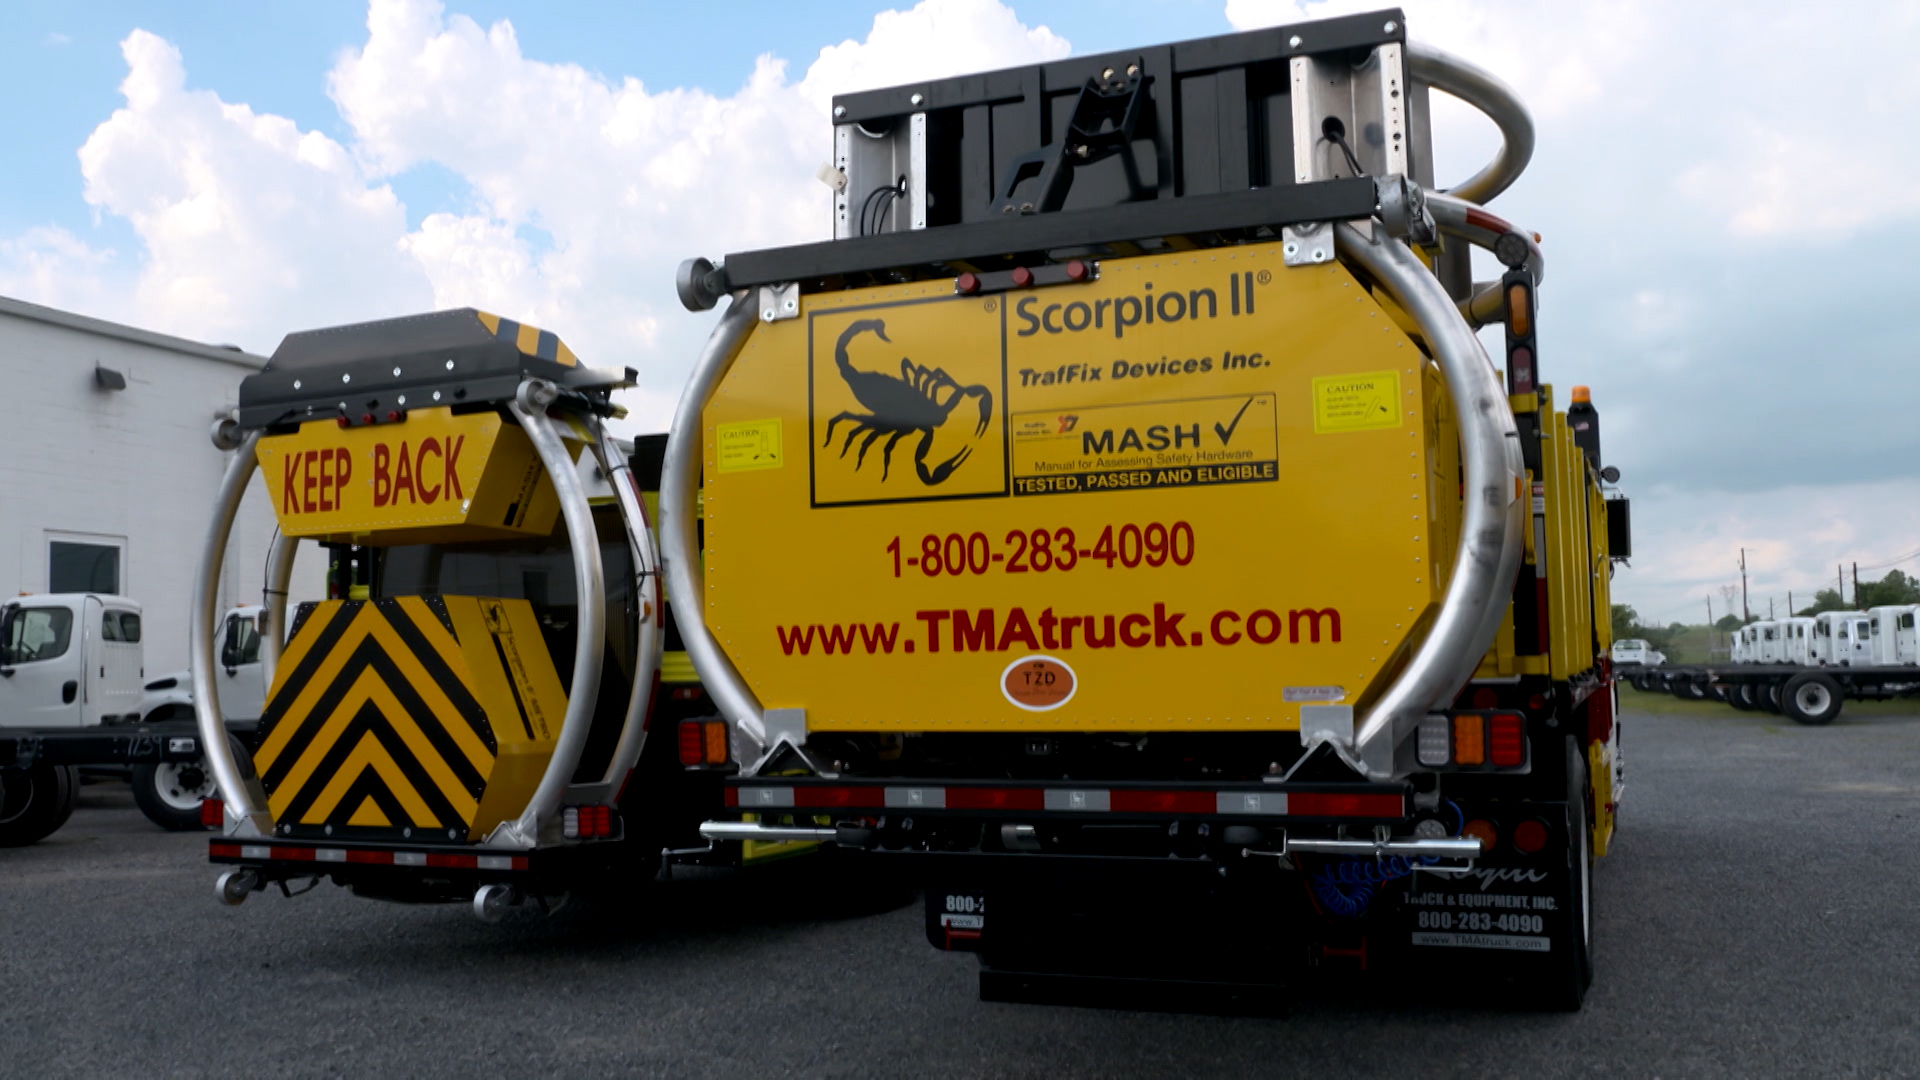 Royal Truck & Equipment: A Truck Designed to Absorb Impact